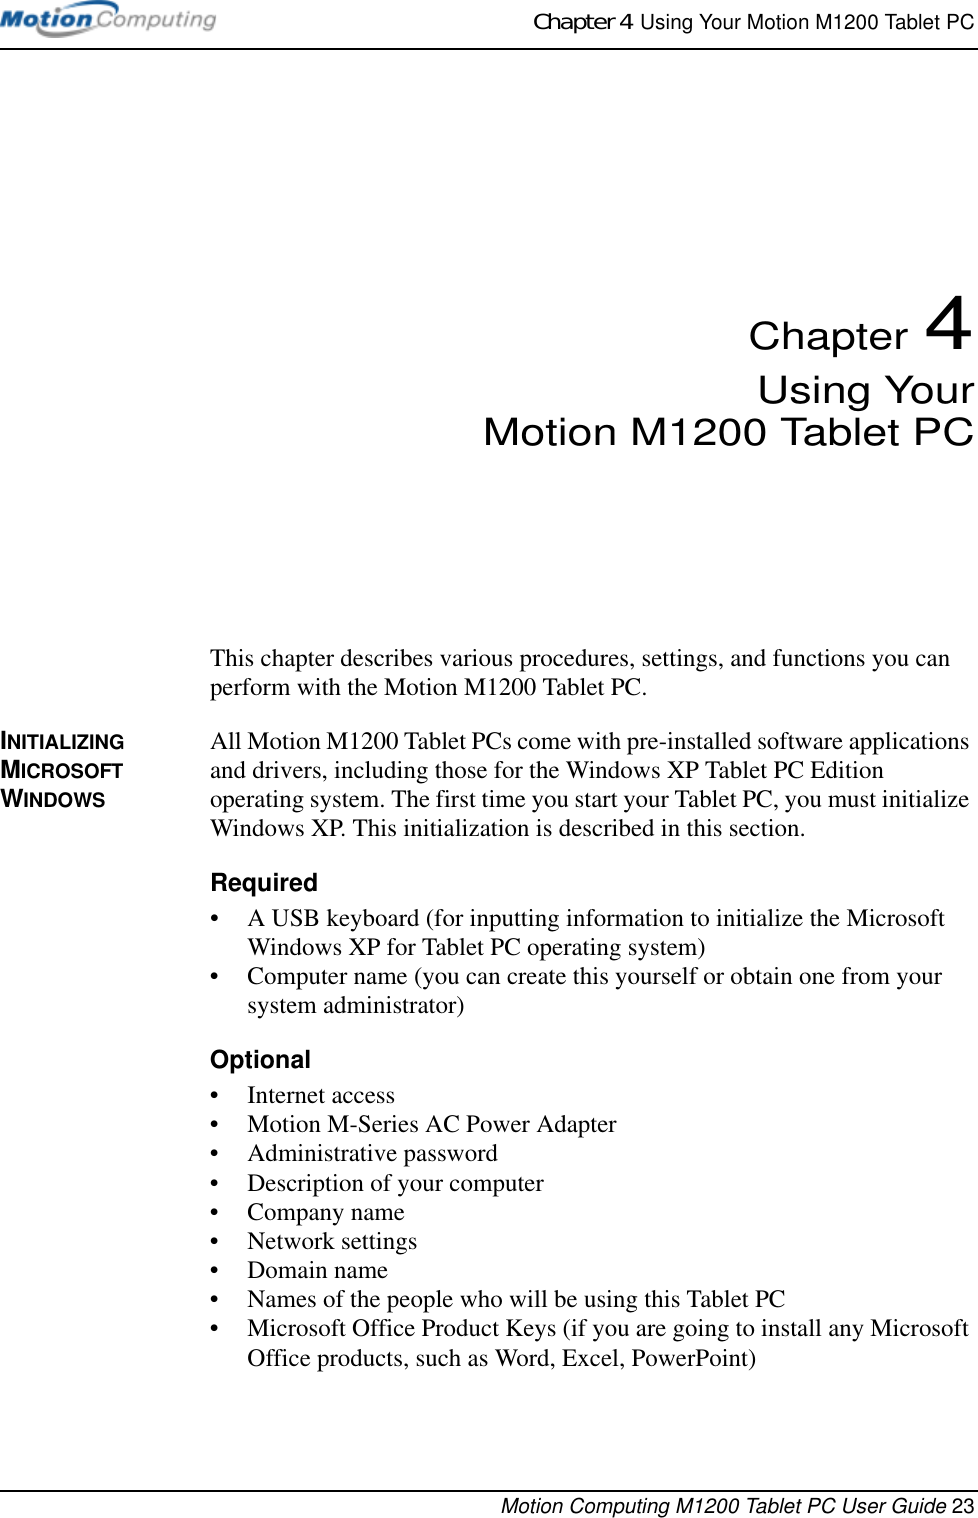 Chapter 4  Using Your Motion M1200 Tablet PCMotion Computing M1200 Tablet PC User Guide 23Chapter 4Using YourMotion M1200 Tablet PCThis chapter describes various procedures, settings, and functions you can perform with the Motion M1200 Tablet PC.INITIALIZING MICROSOFT WINDOWSAll Motion M1200 Tablet PCs come with pre-installed software applications and drivers, including those for the Windows XP Tablet PC Edition operating system. The first time you start your Tablet PC, you must initialize Windows XP. This initialization is described in this section.Required• A USB keyboard (for inputting information to initialize the Microsoft Windows XP for Tablet PC operating system)• Computer name (you can create this yourself or obtain one from your system administrator)Optional• Internet access• Motion M-Series AC Power Adapter• Administrative password• Description of your computer• Company name • Network settings • Domain name• Names of the people who will be using this Tablet PC• Microsoft Office Product Keys (if you are going to install any Microsoft Office products, such as Word, Excel, PowerPoint)